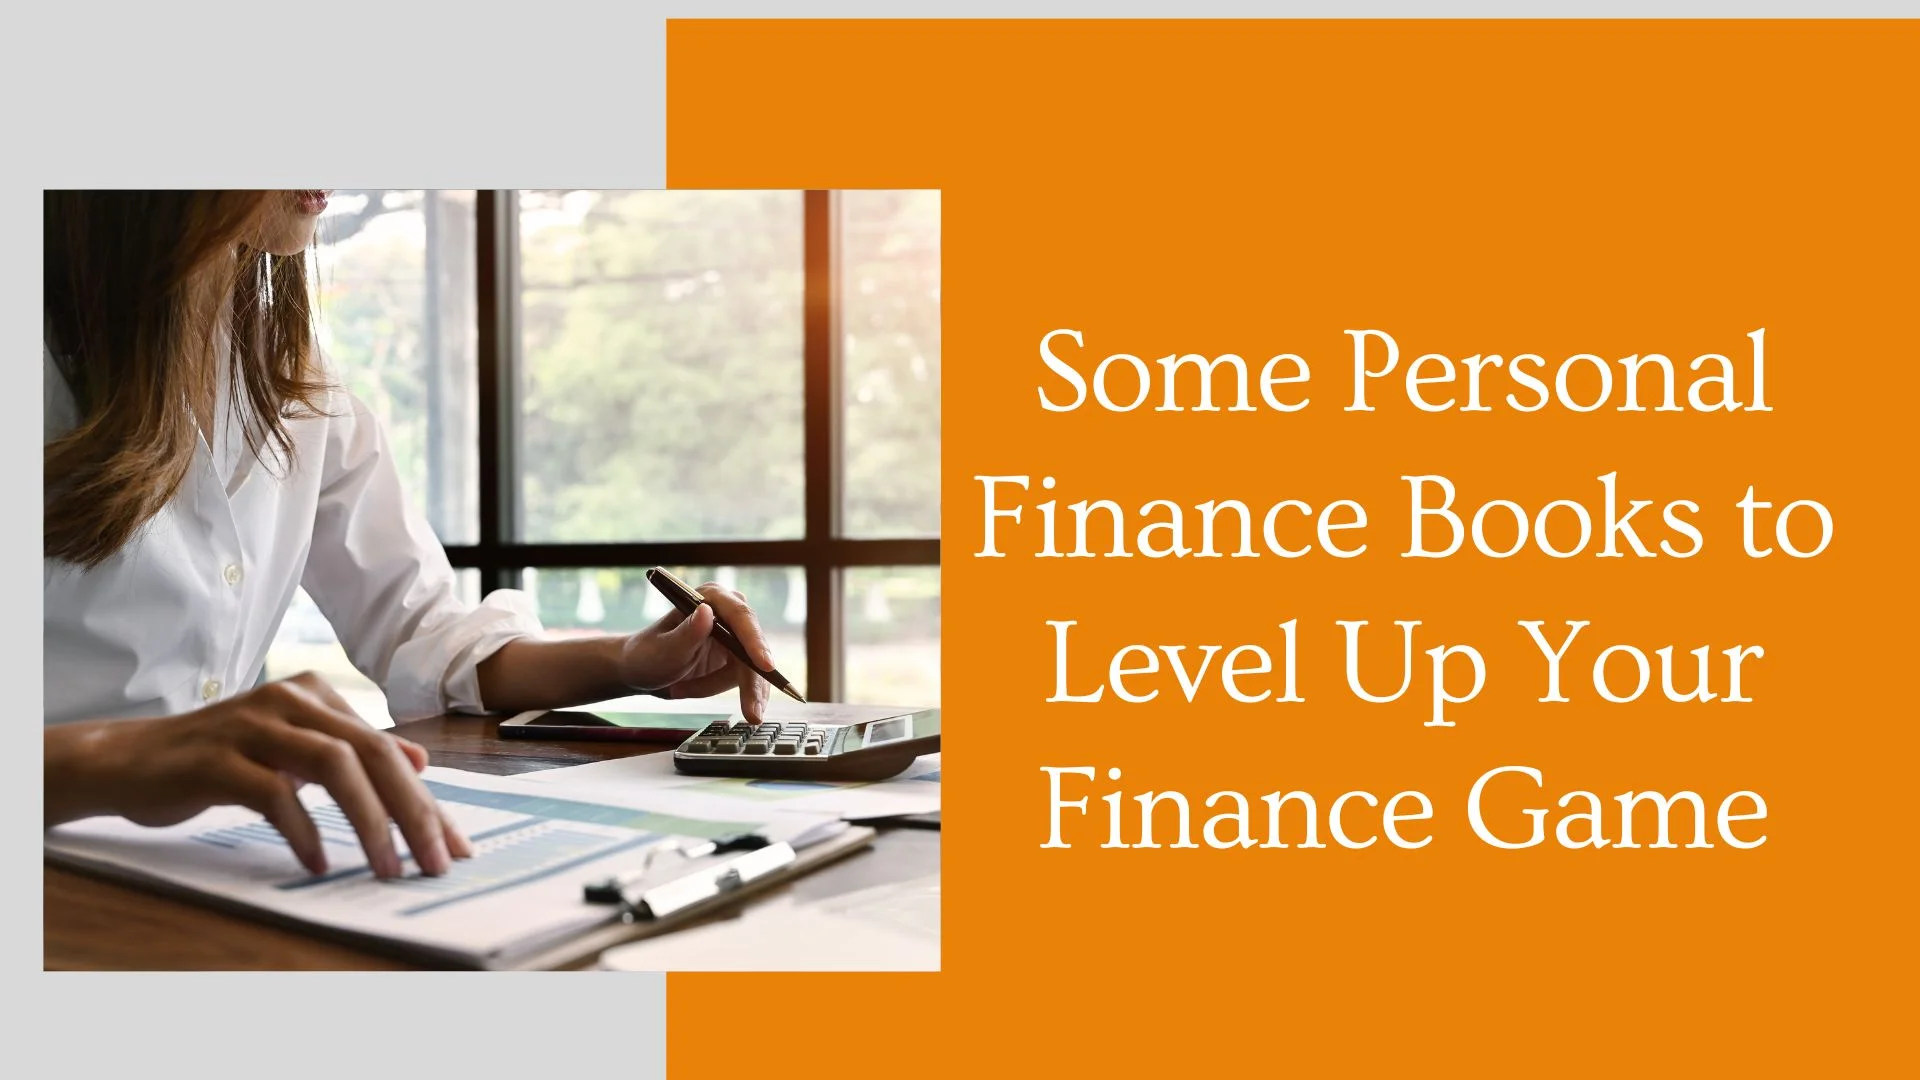 Some Personal Finance Books to Level Up Your Finance Game